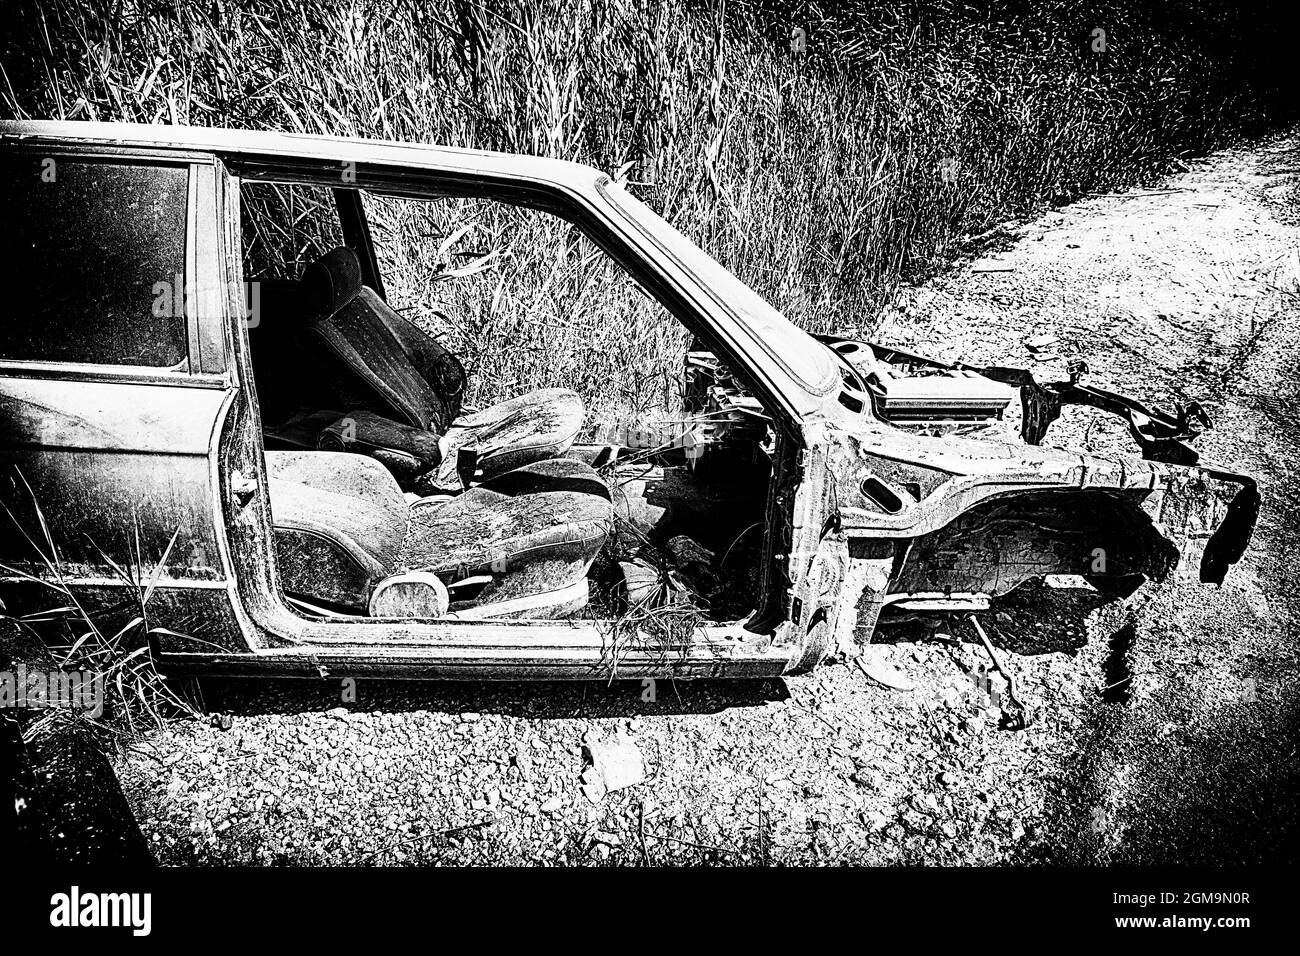 Carcass of a car without doors and hood cover abandoned in nature in black and white style Stock Photo